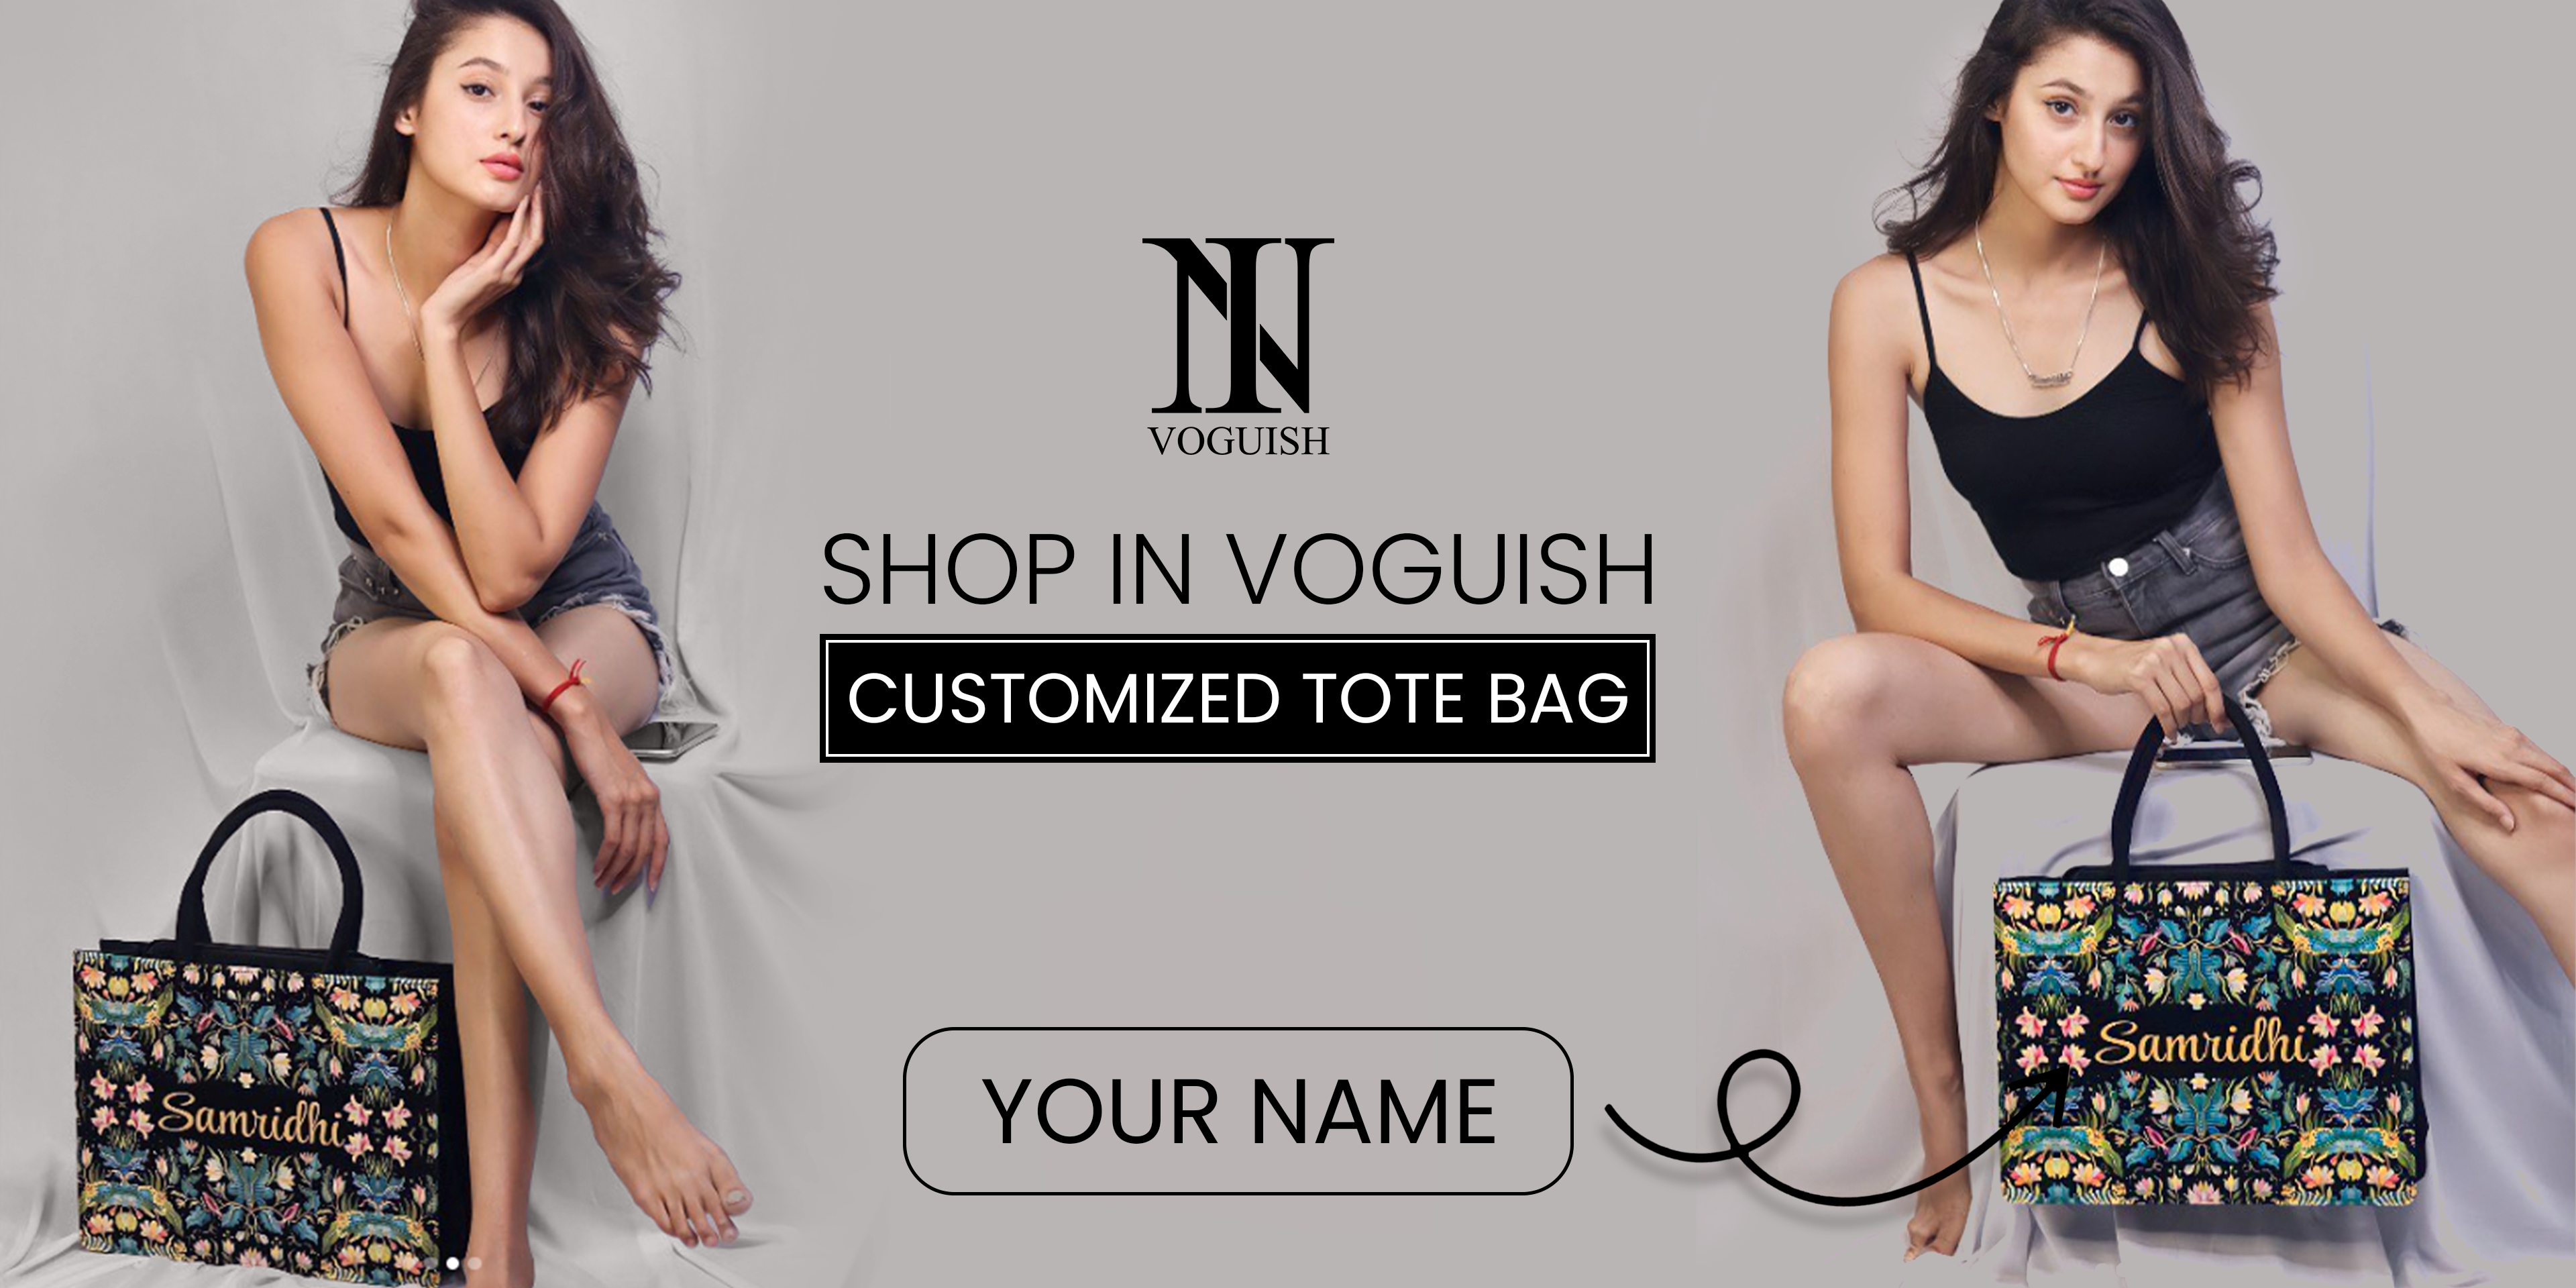 Customized tote bag by In Voguish